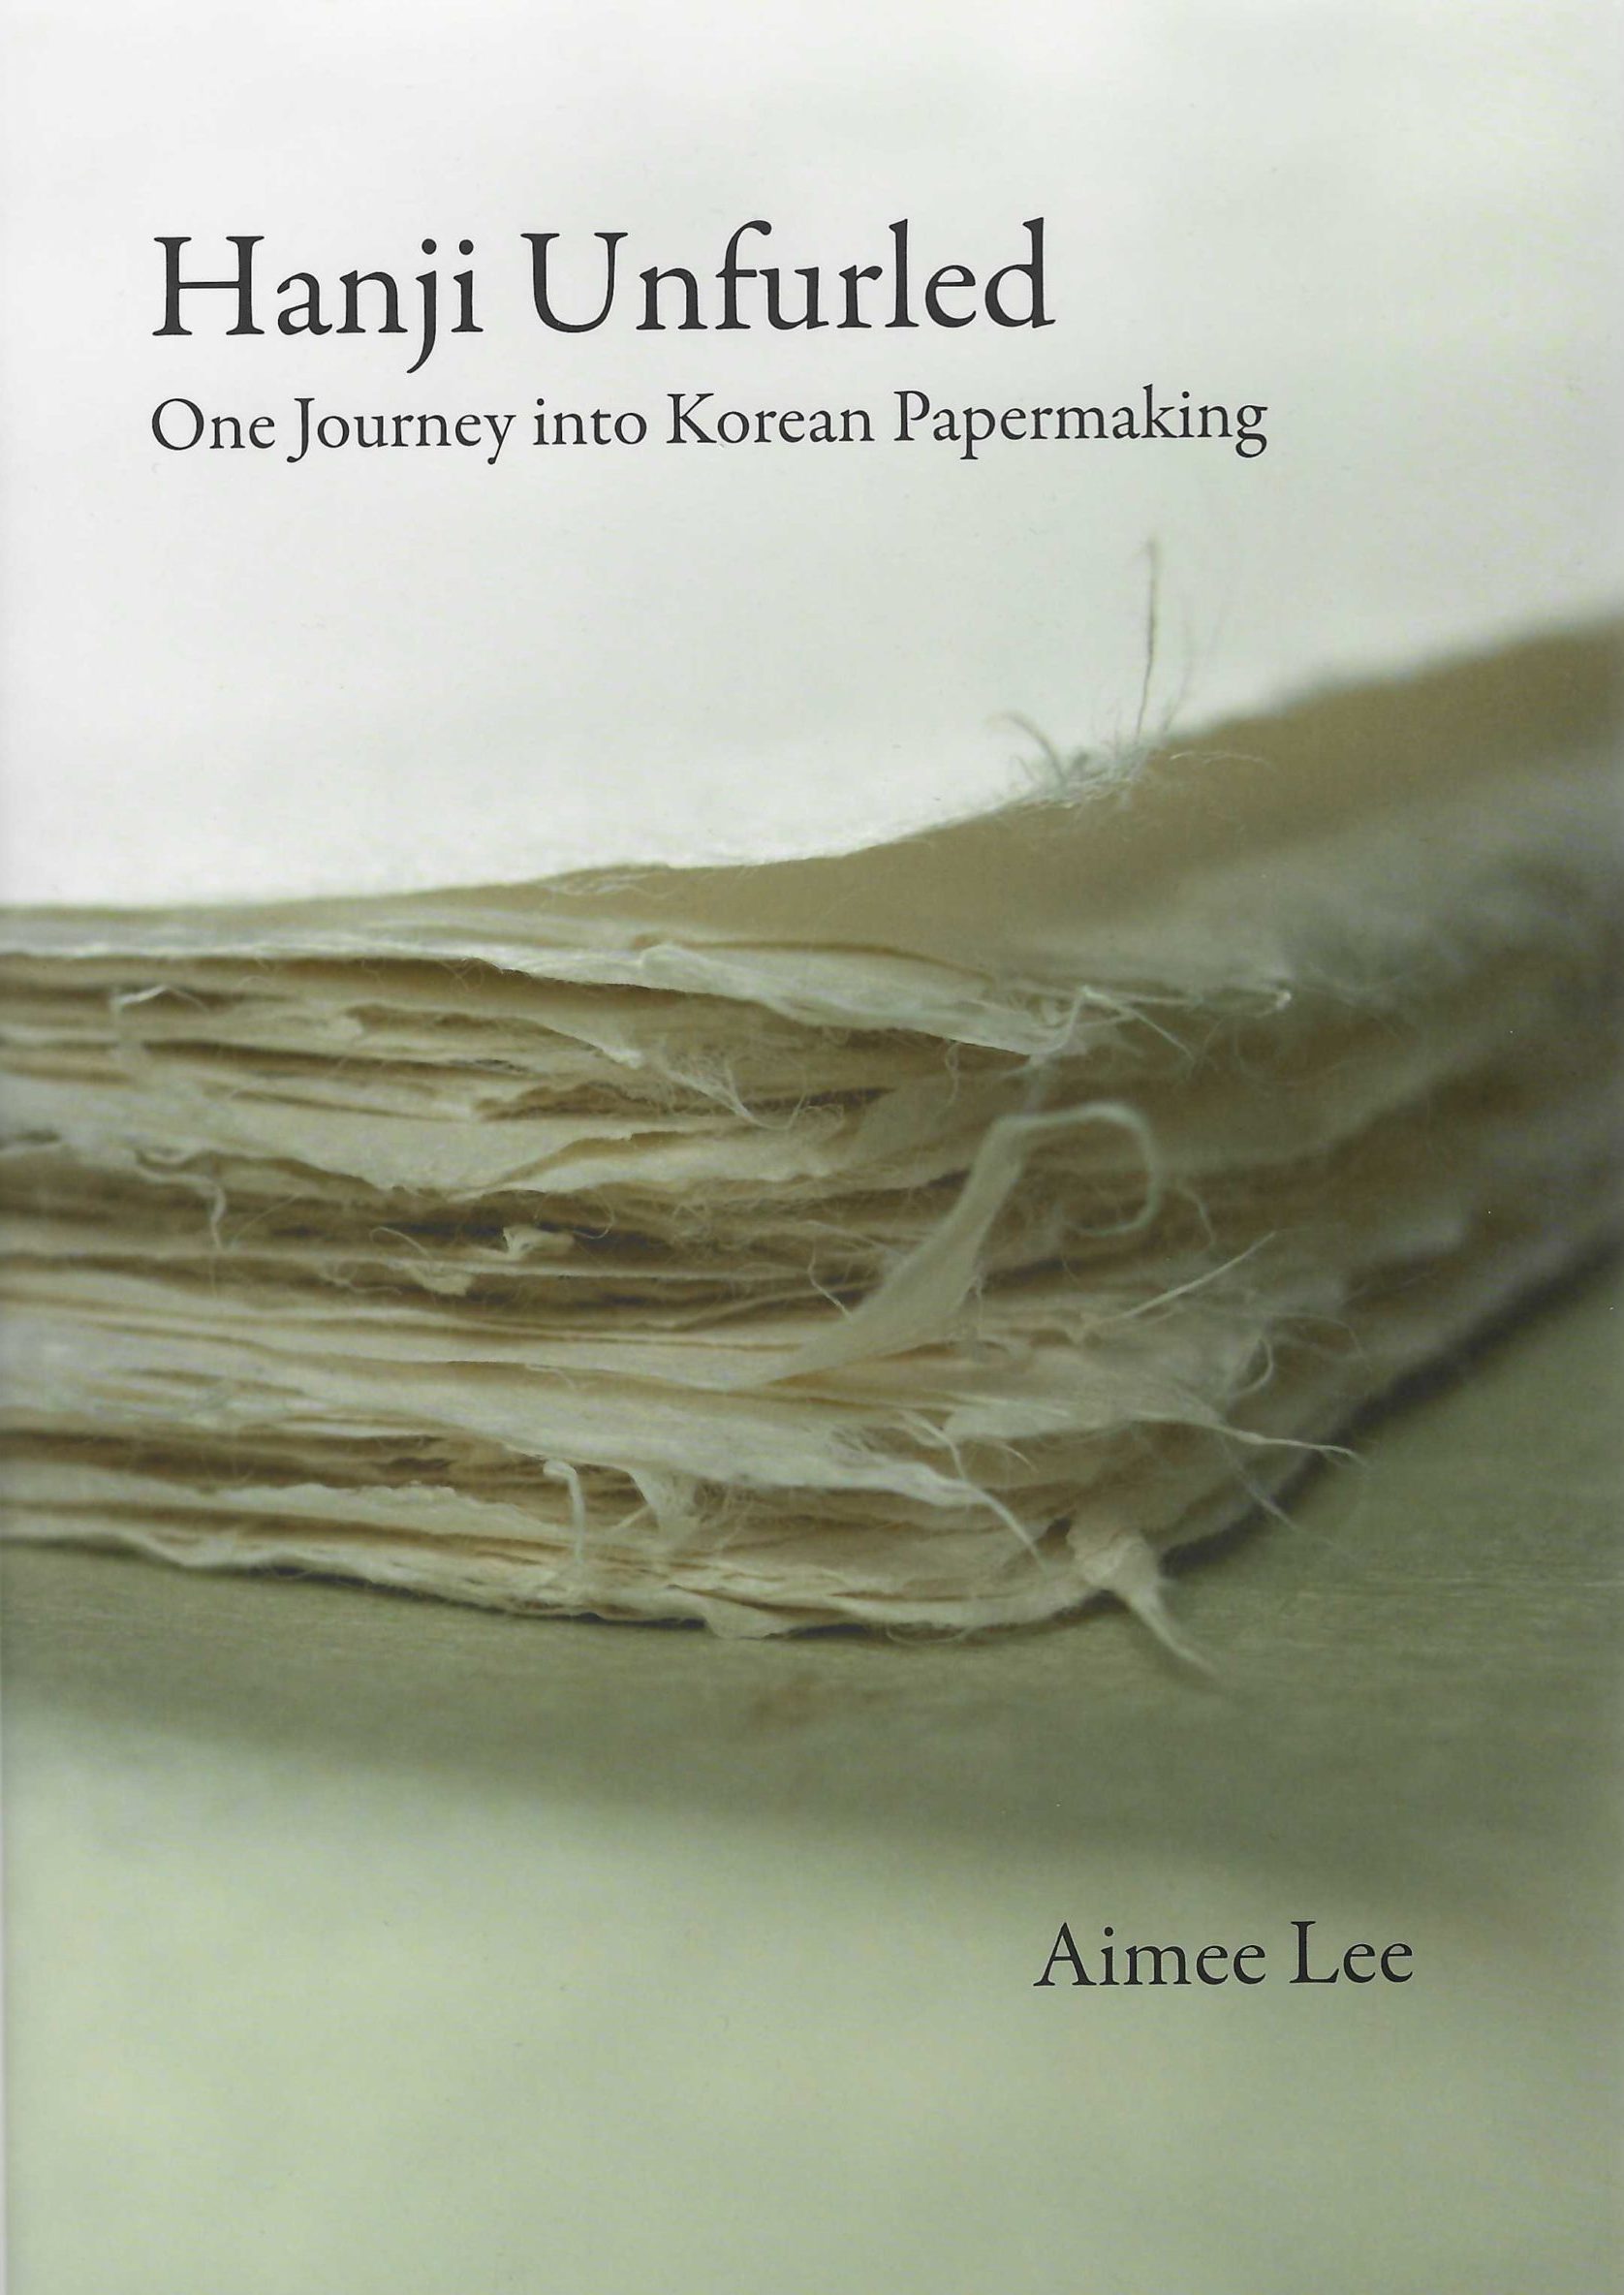 Hanji Unfurled: One Journey into Korean Papermaking - Center for Book Arts